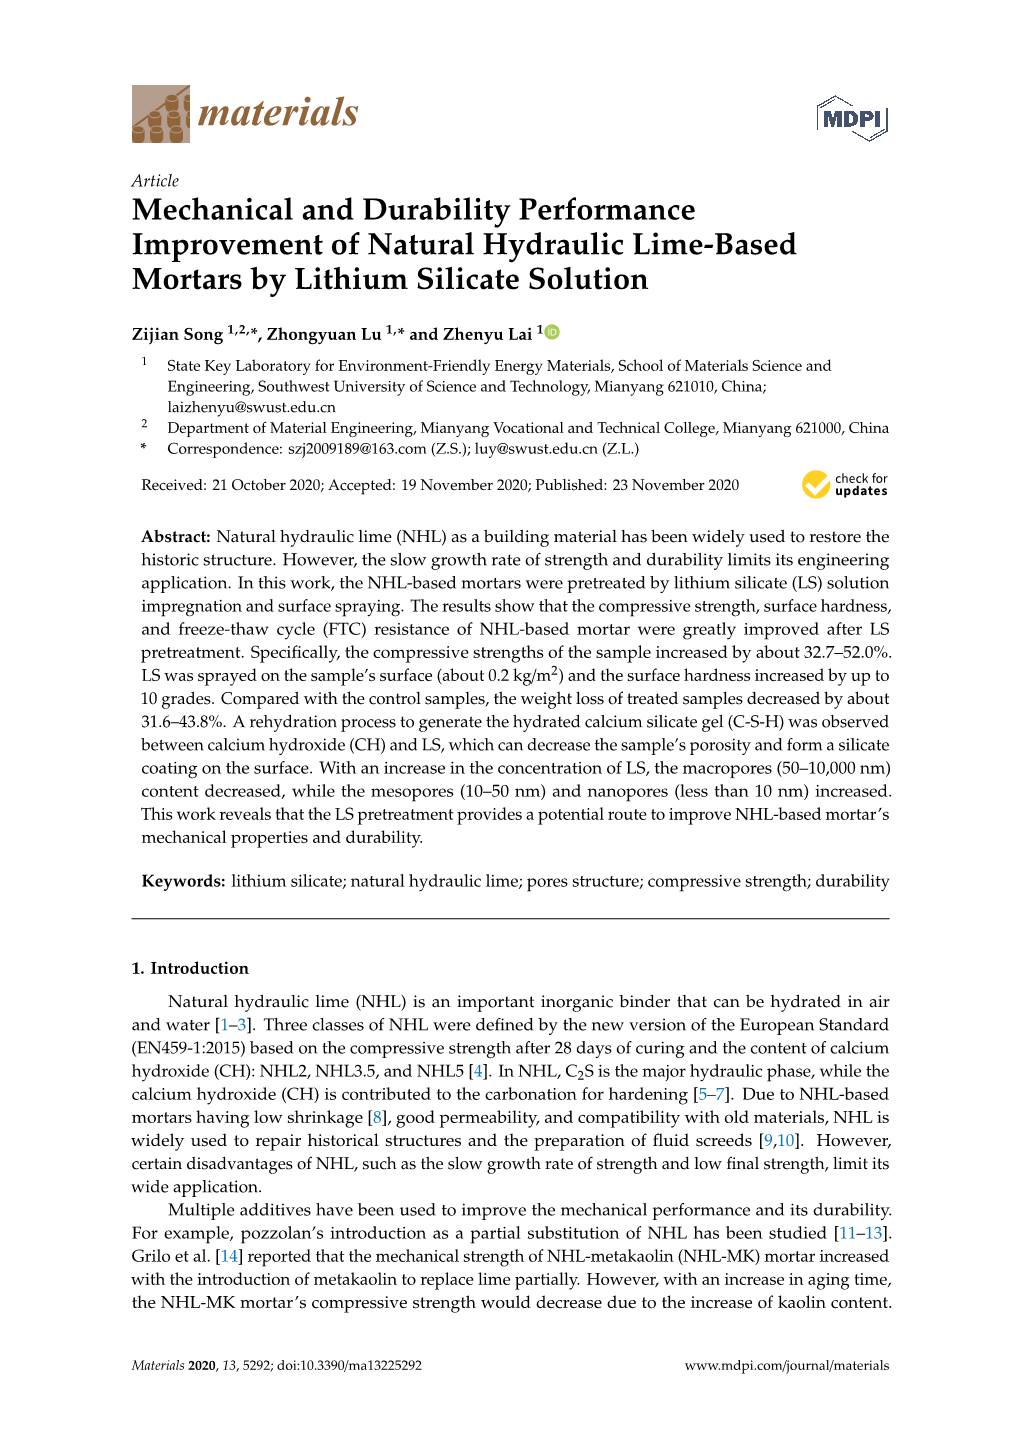 Mechanical and Durability Performance Improvement of Natural Hydraulic Lime-Based Mortars by Lithium Silicate Solution